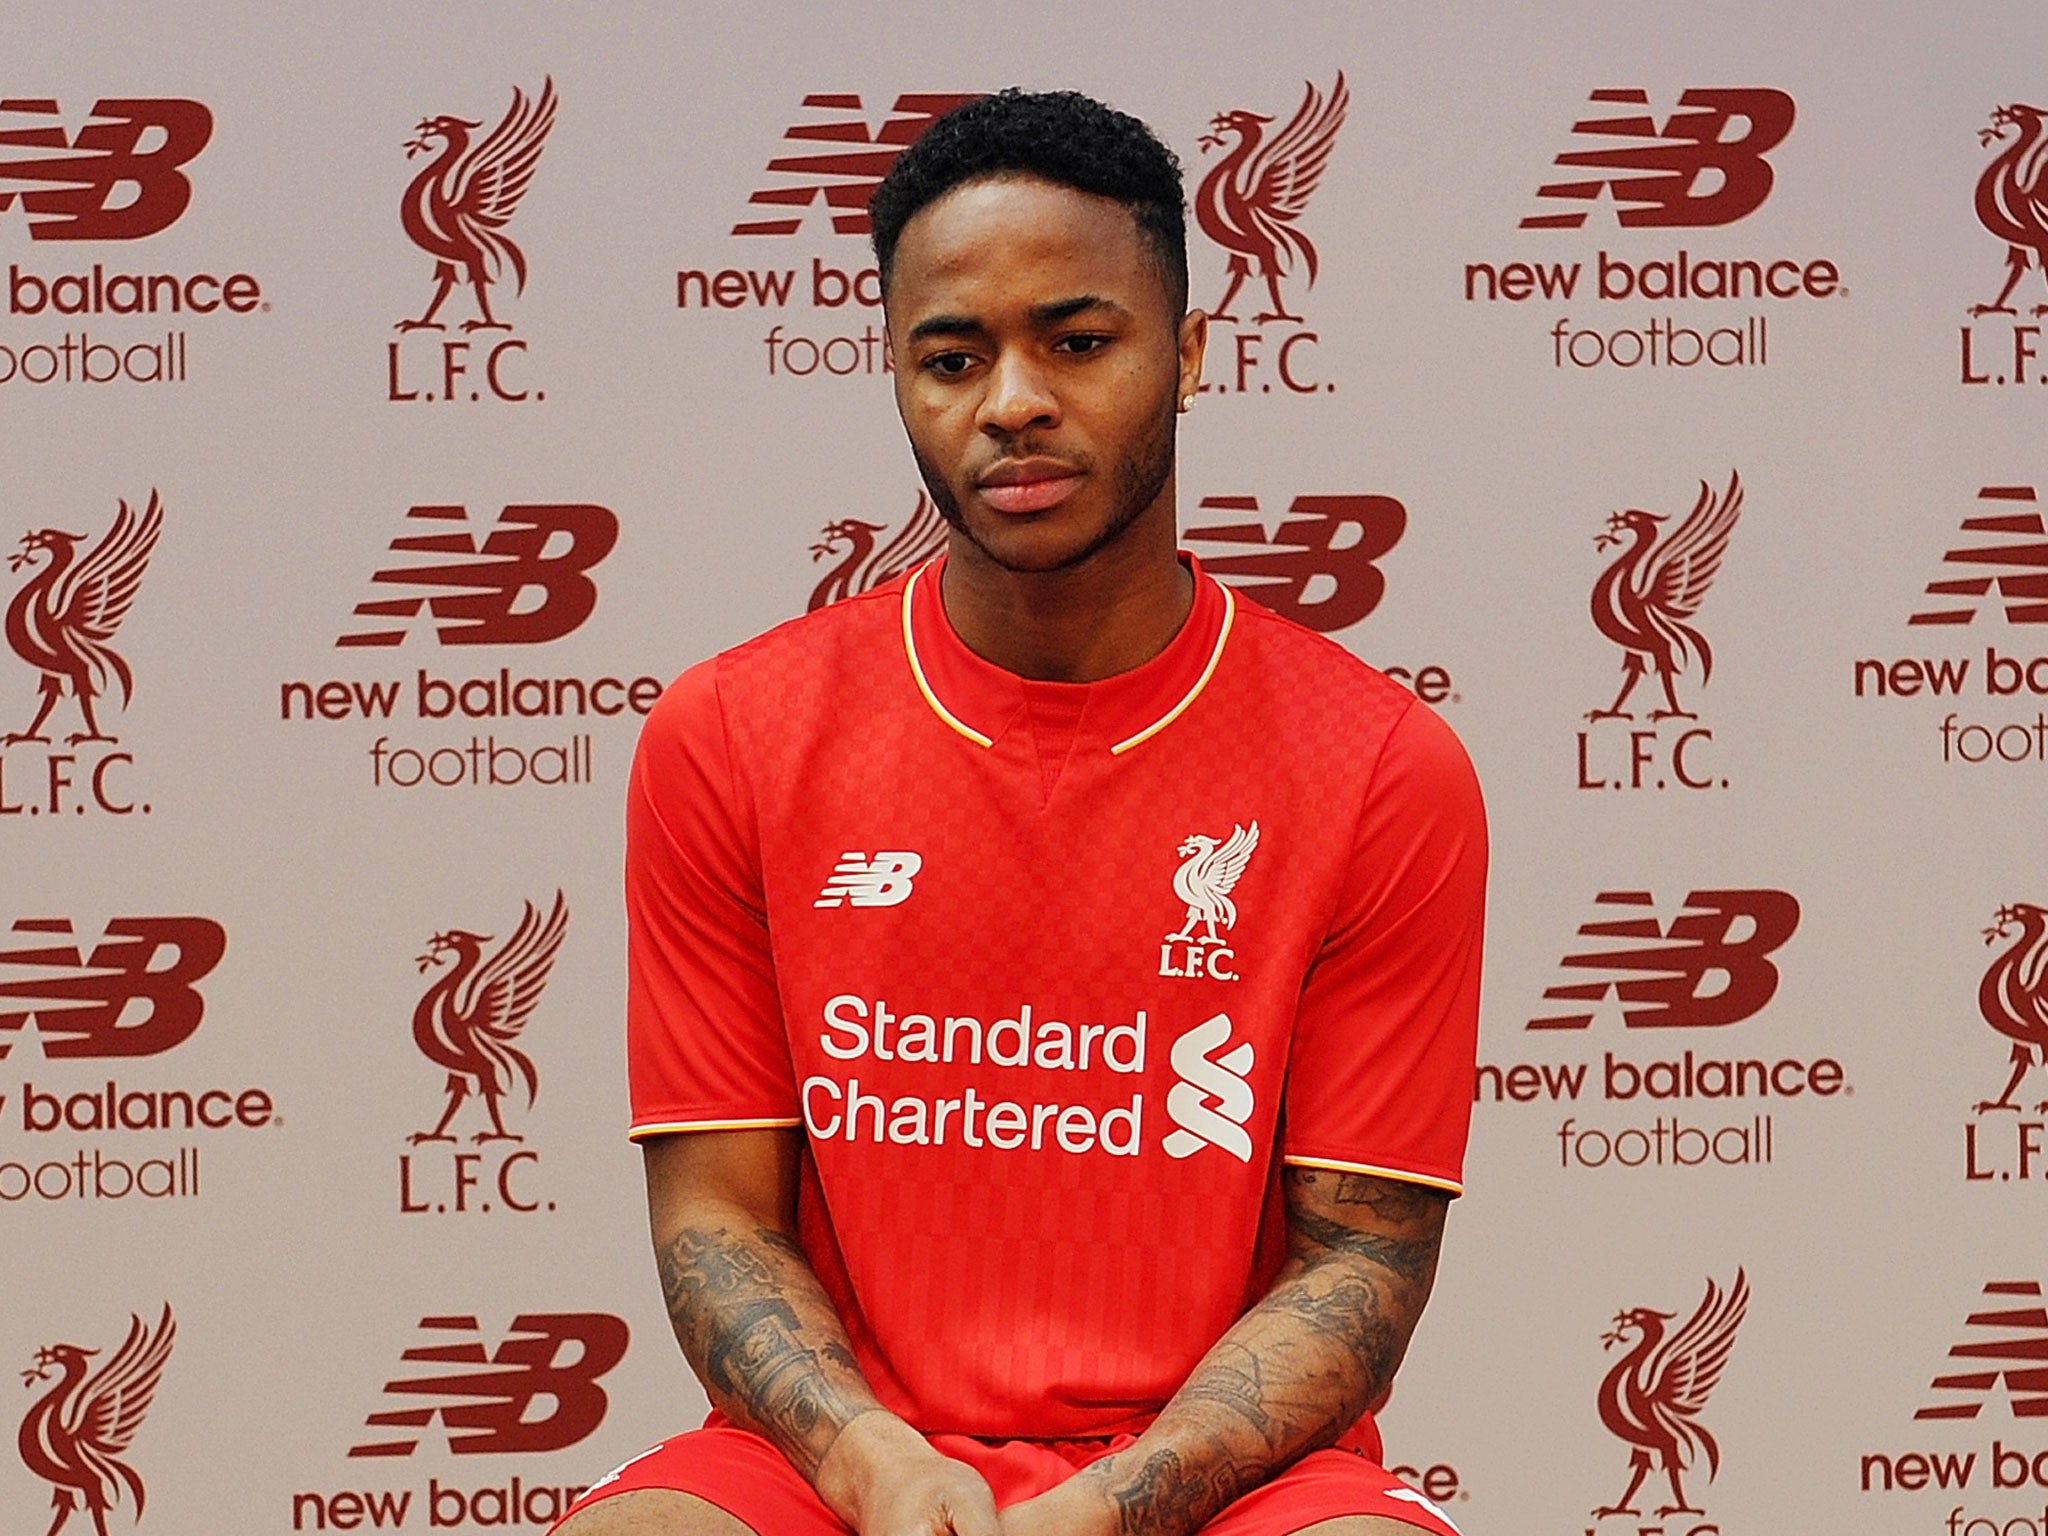 A downbeat Raheem Sterling during Liverpool's kit launch on Friday - when he was heckled by fans